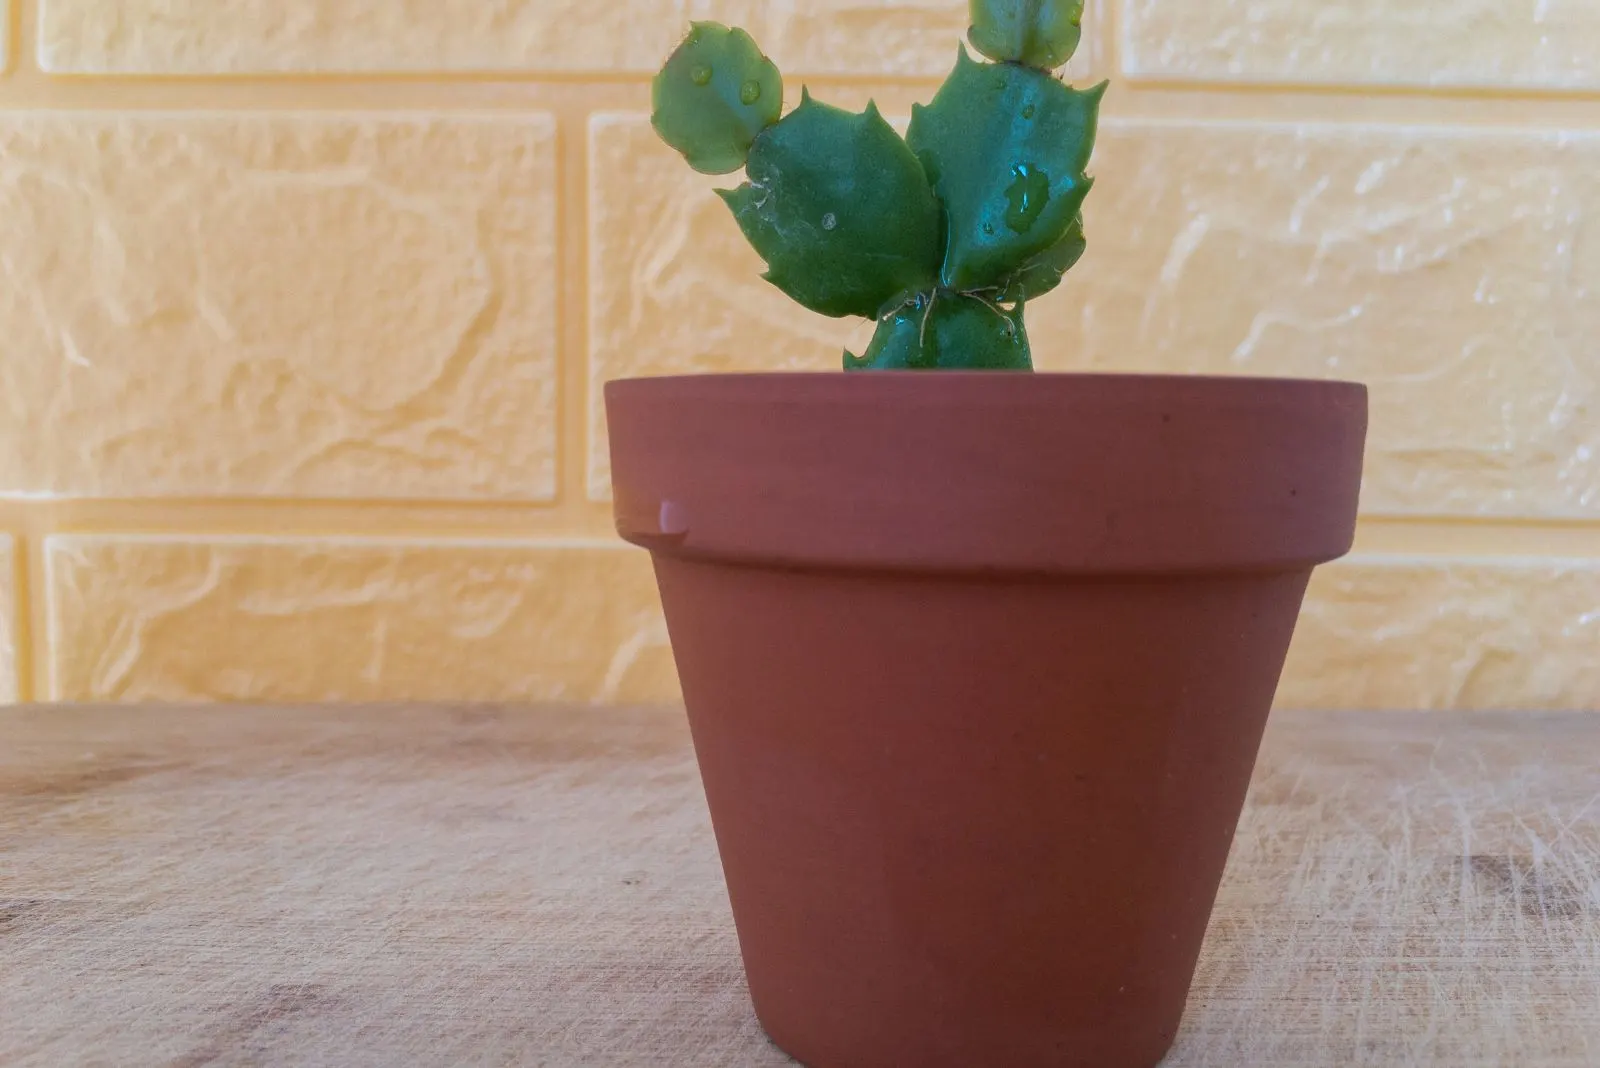 pruned Christmas cactus in a brown pot